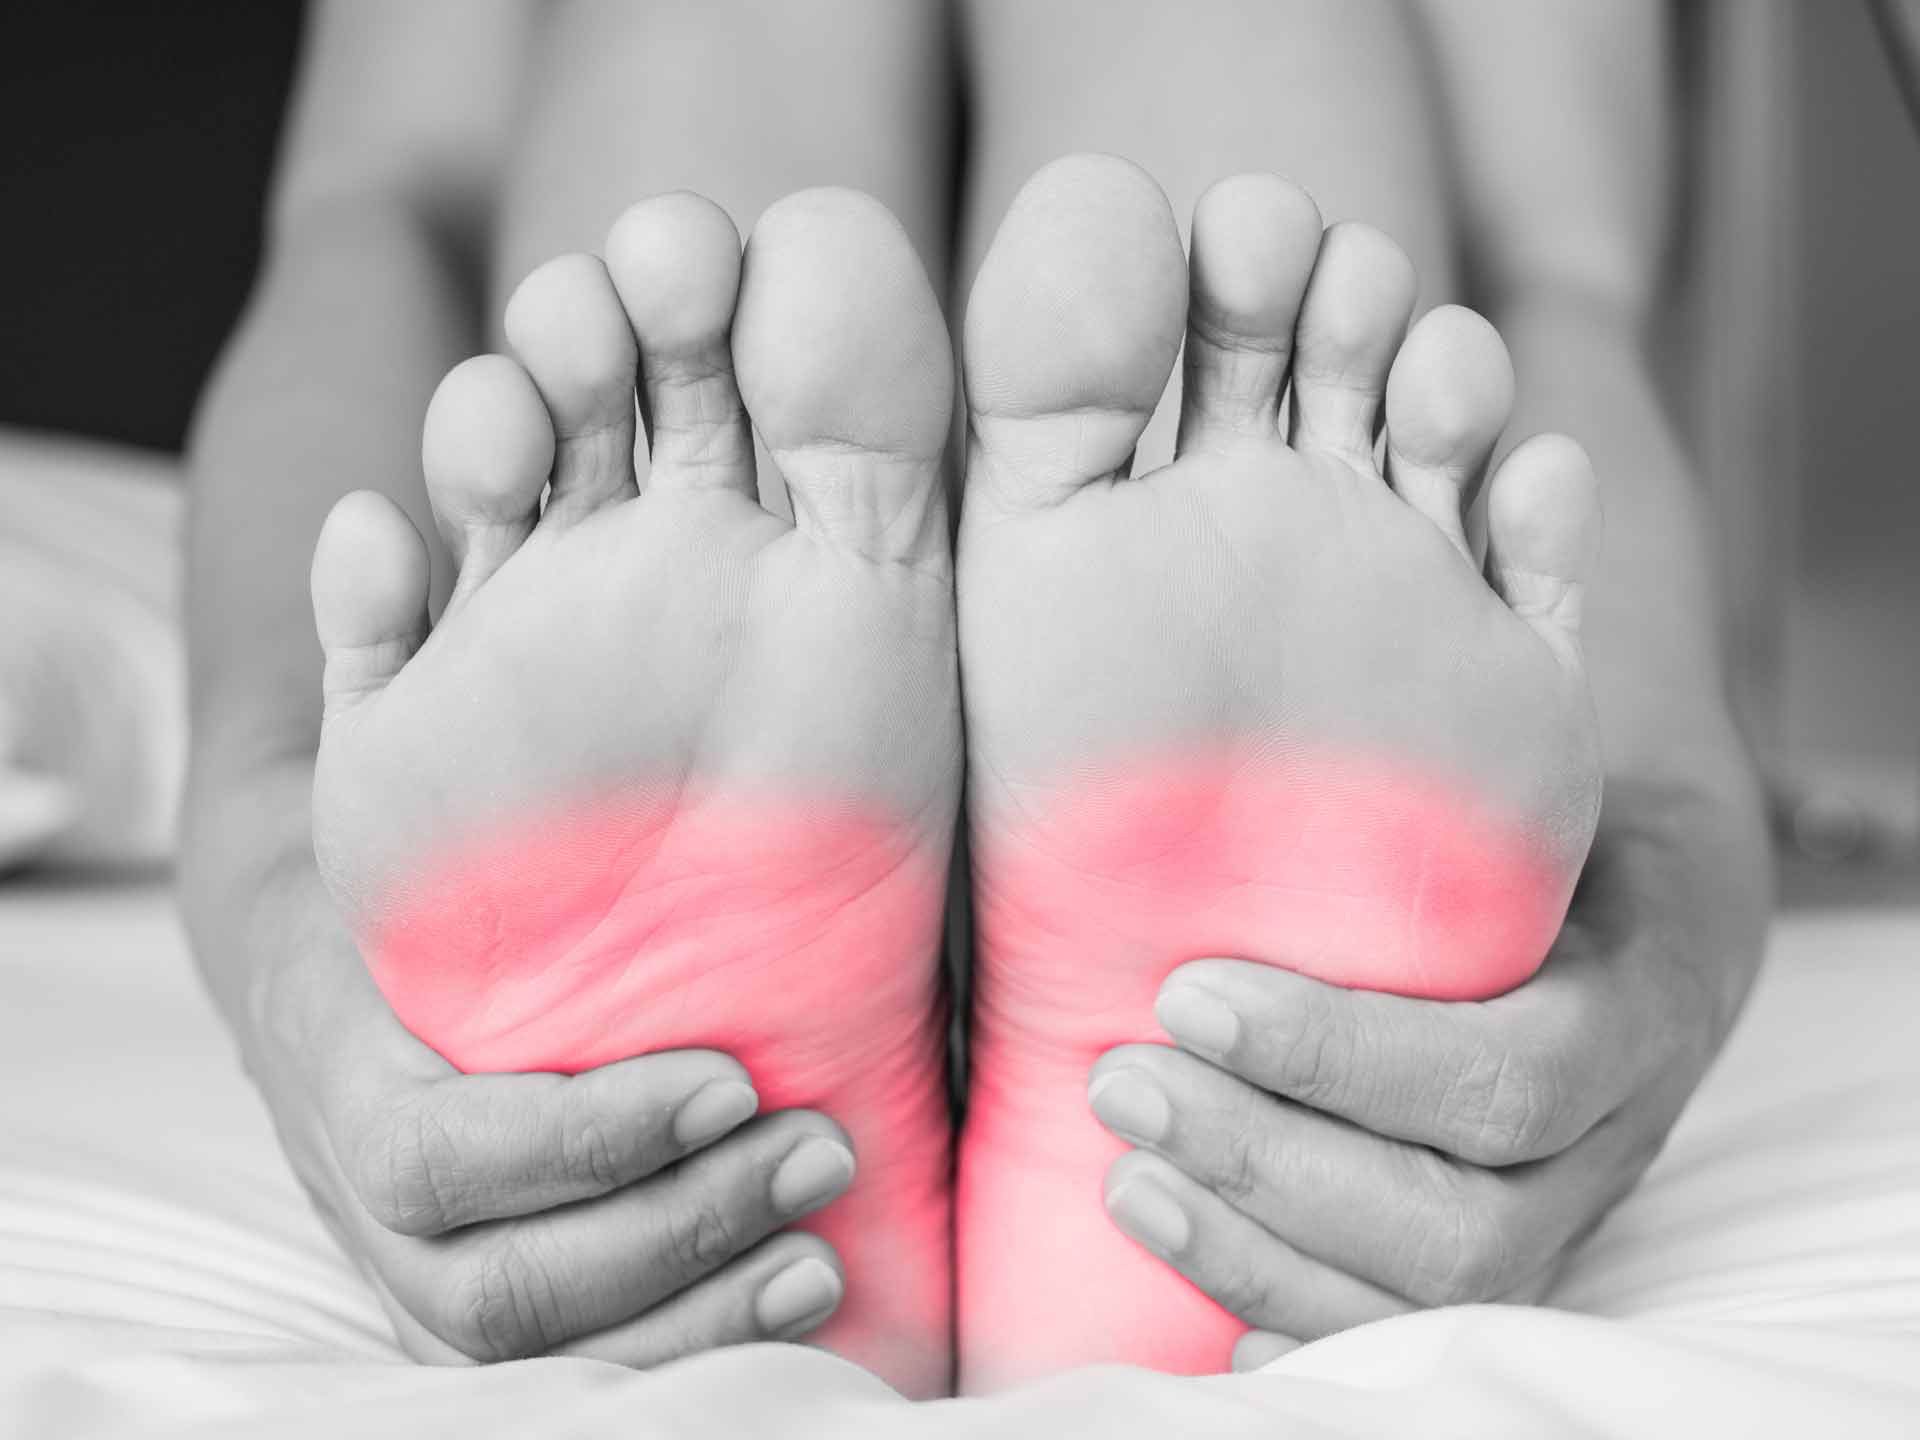 Black and white image of a person holding their feet with red highlighted areas on the soles, suggesting pain or discomfort